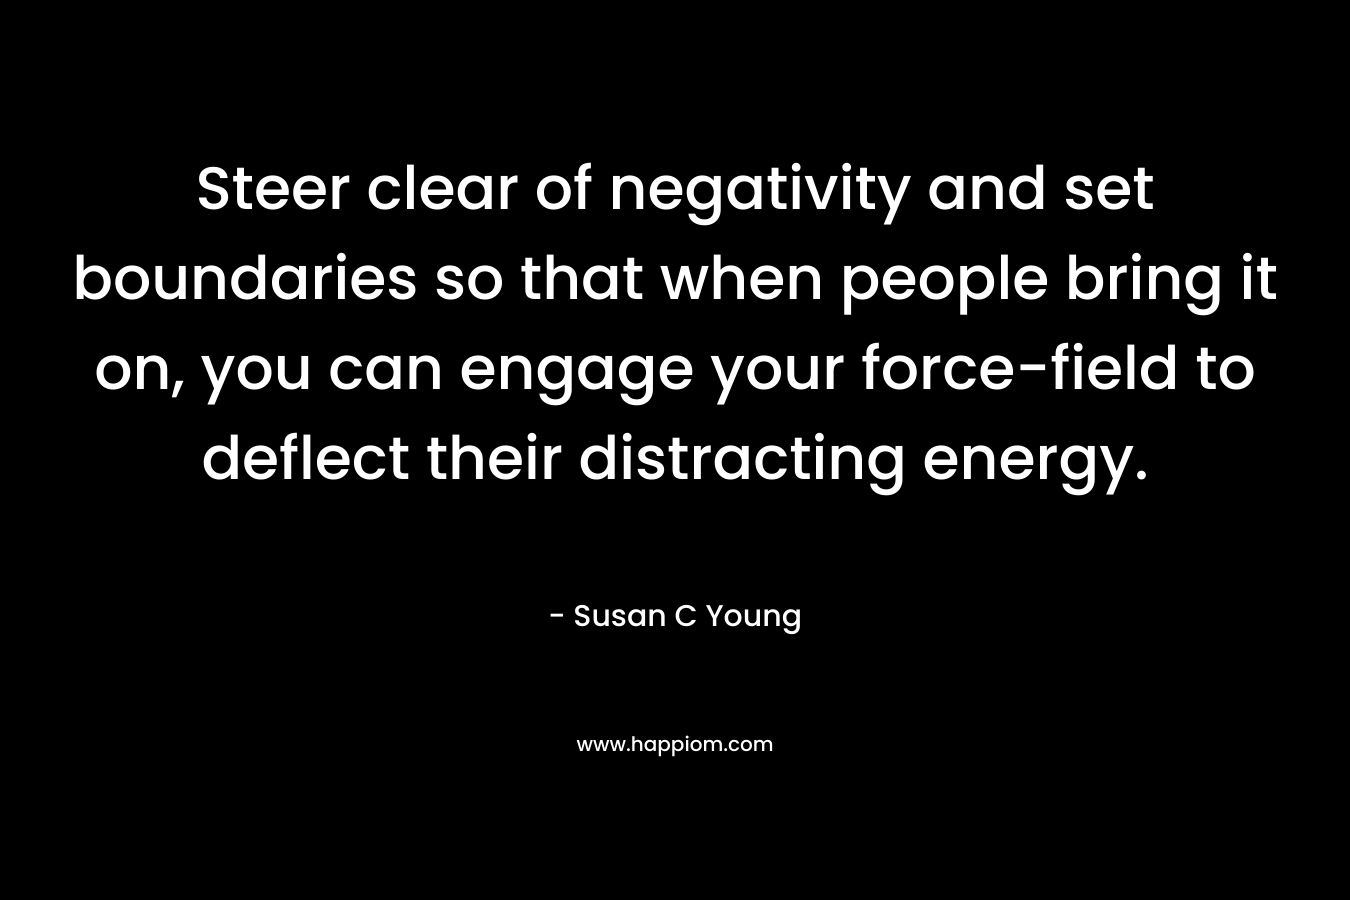 Steer clear of negativity and set boundaries so that when people bring it on, you can engage your force-field to deflect their distracting energy.